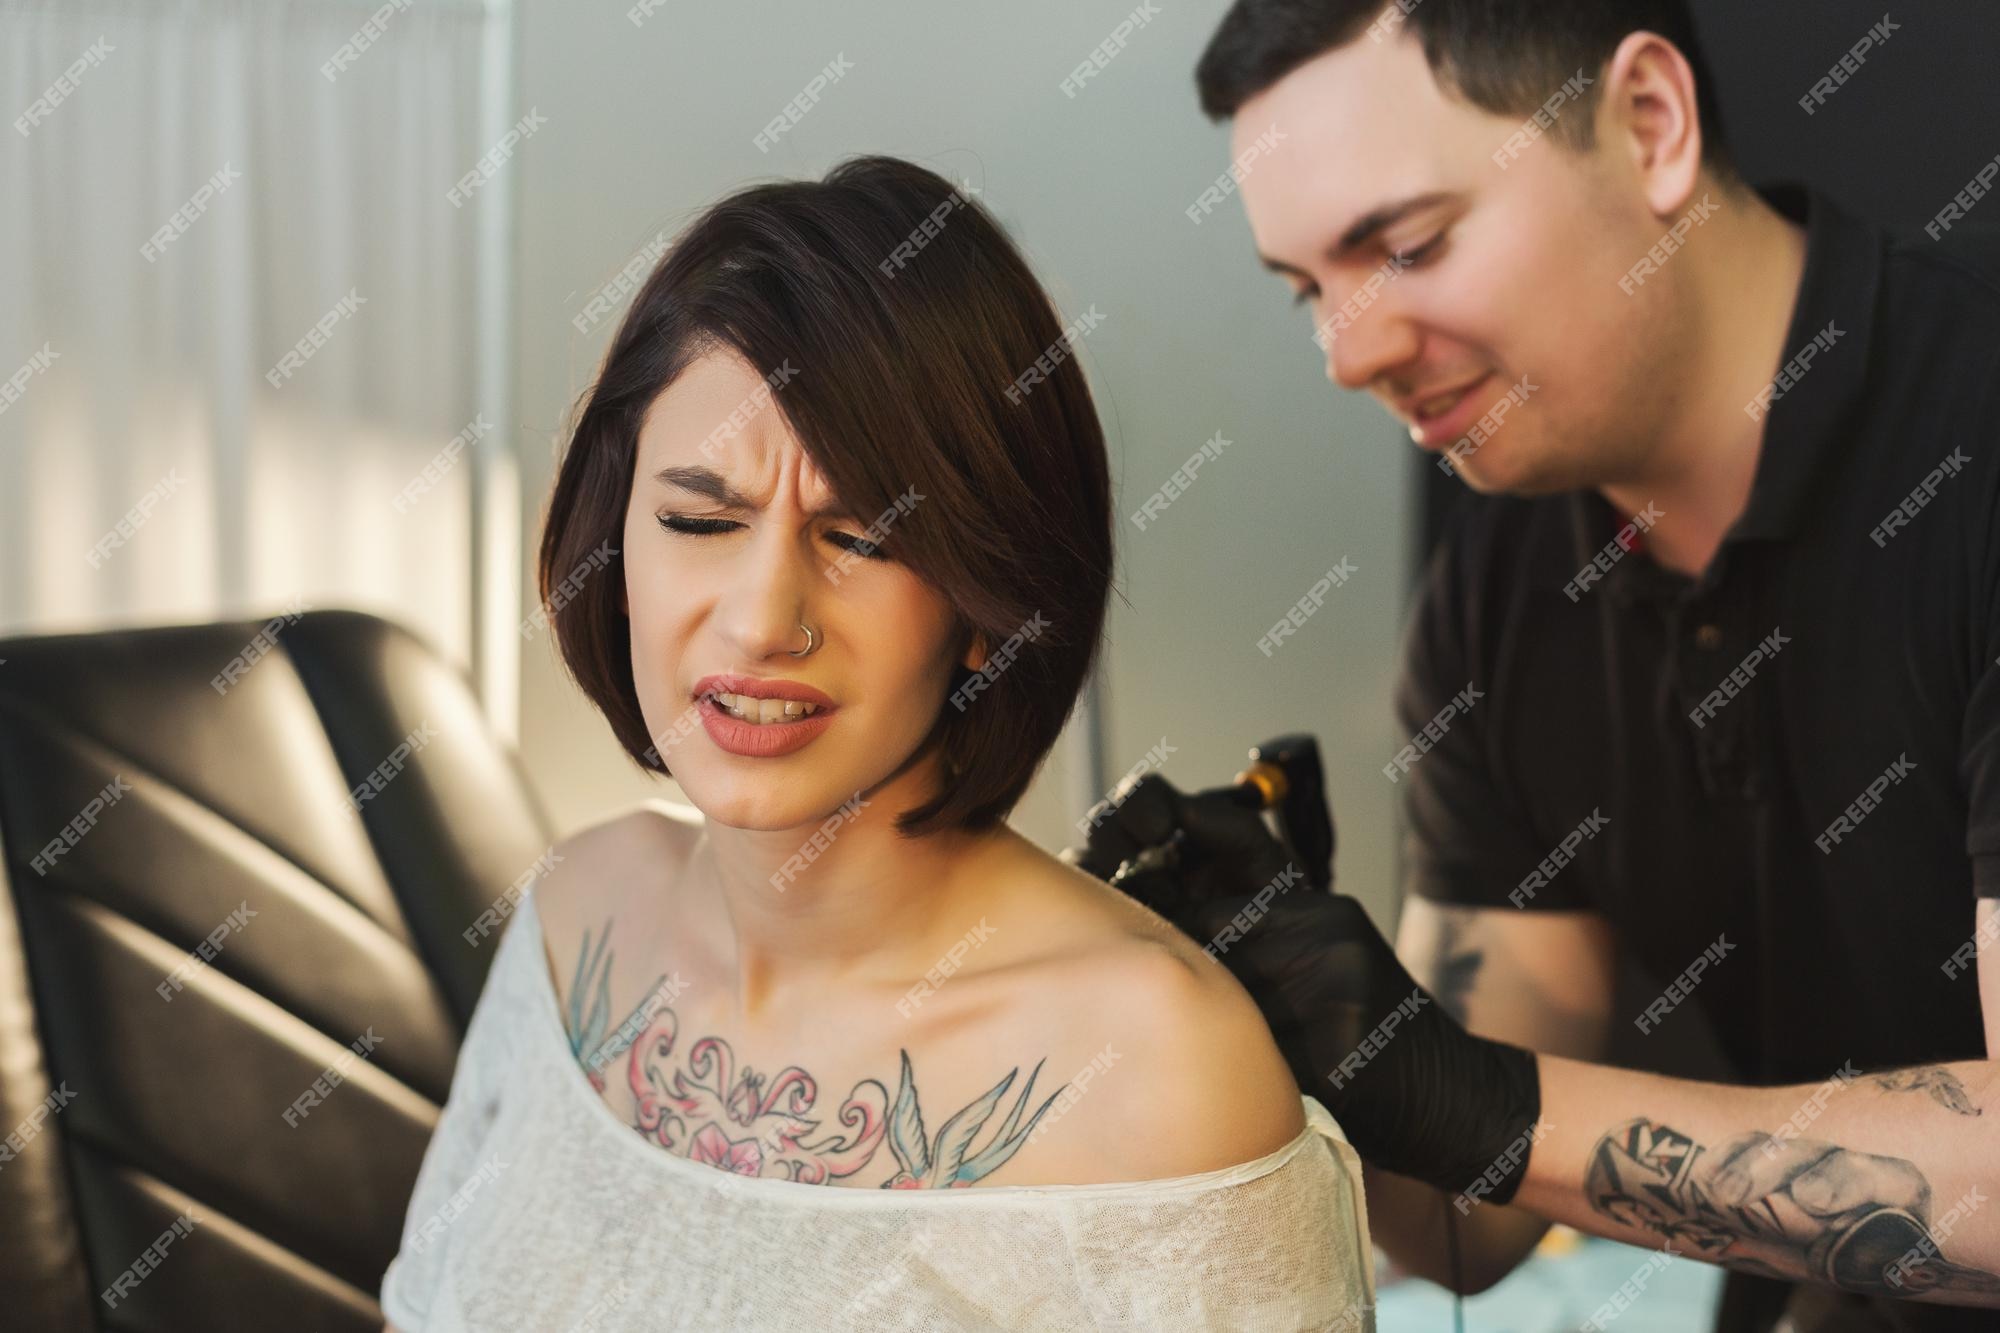 Premium Photo | Painful tattooing process, young woman grimacing while  master making tattoo on her back. popular body modification, modern  lifestyle, copy space